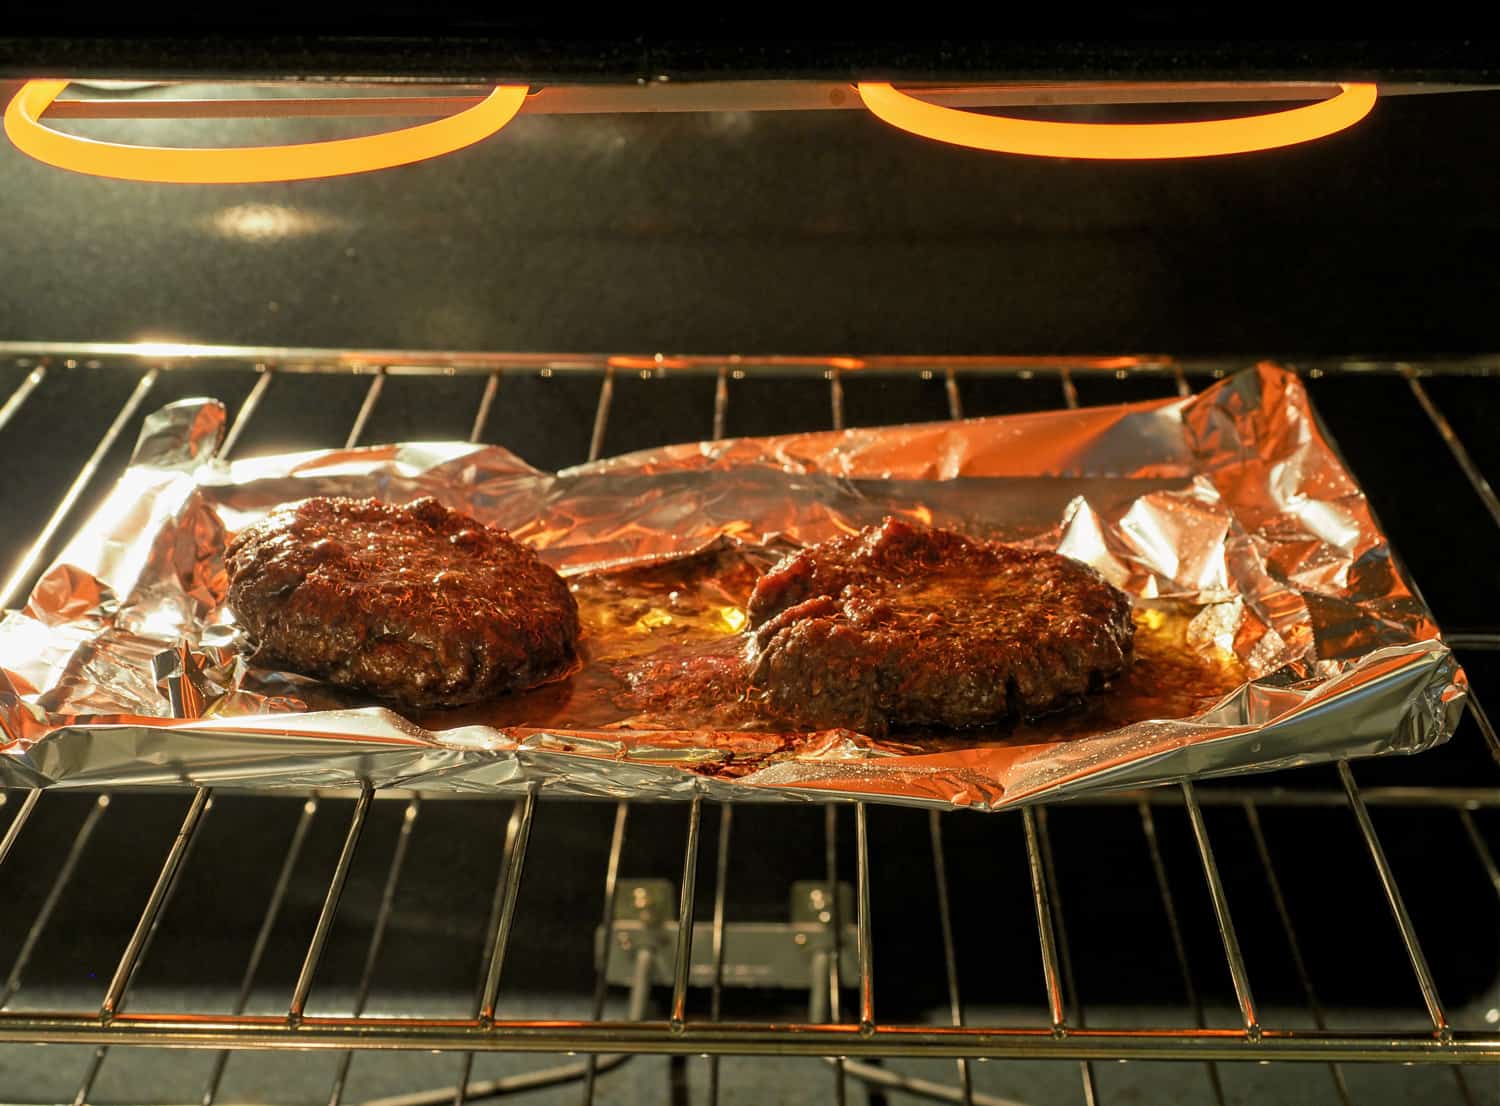 Greasy hamburgers being broiled in an electric stove. Hamburger patties on an aluminum foil tray to collect the abundant unhealthy grease.